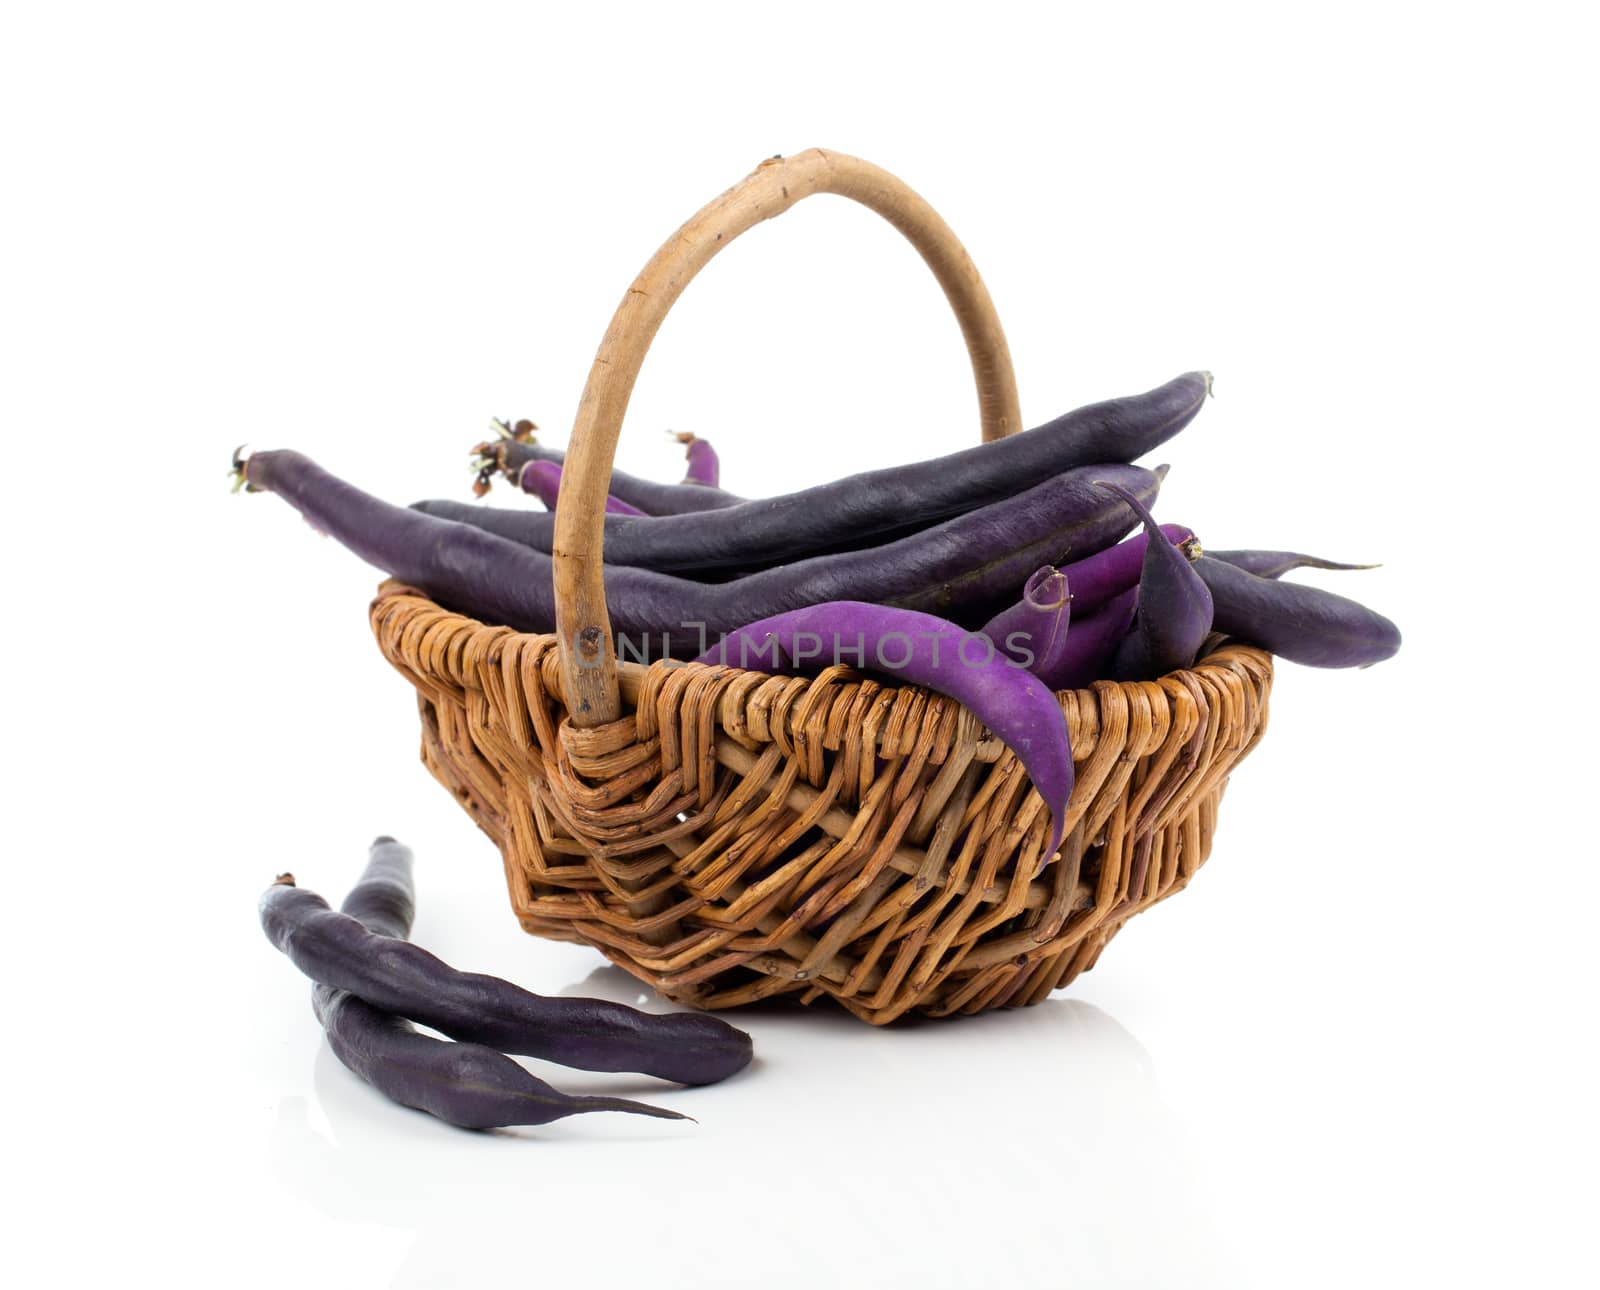 Red bean pods in wicker basket over white background